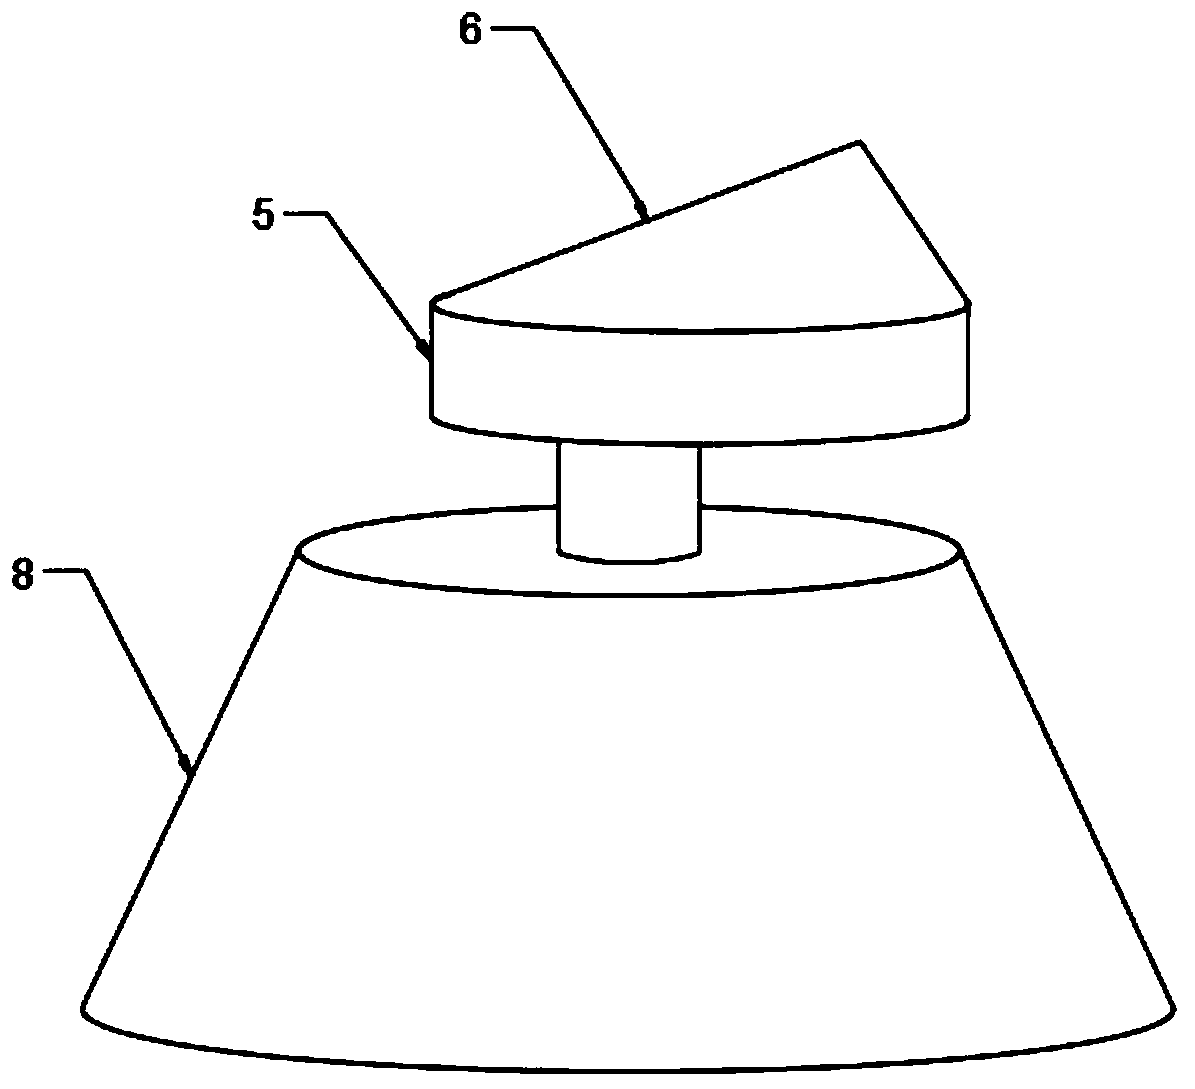 Ore crushing device with dust falling mechanism